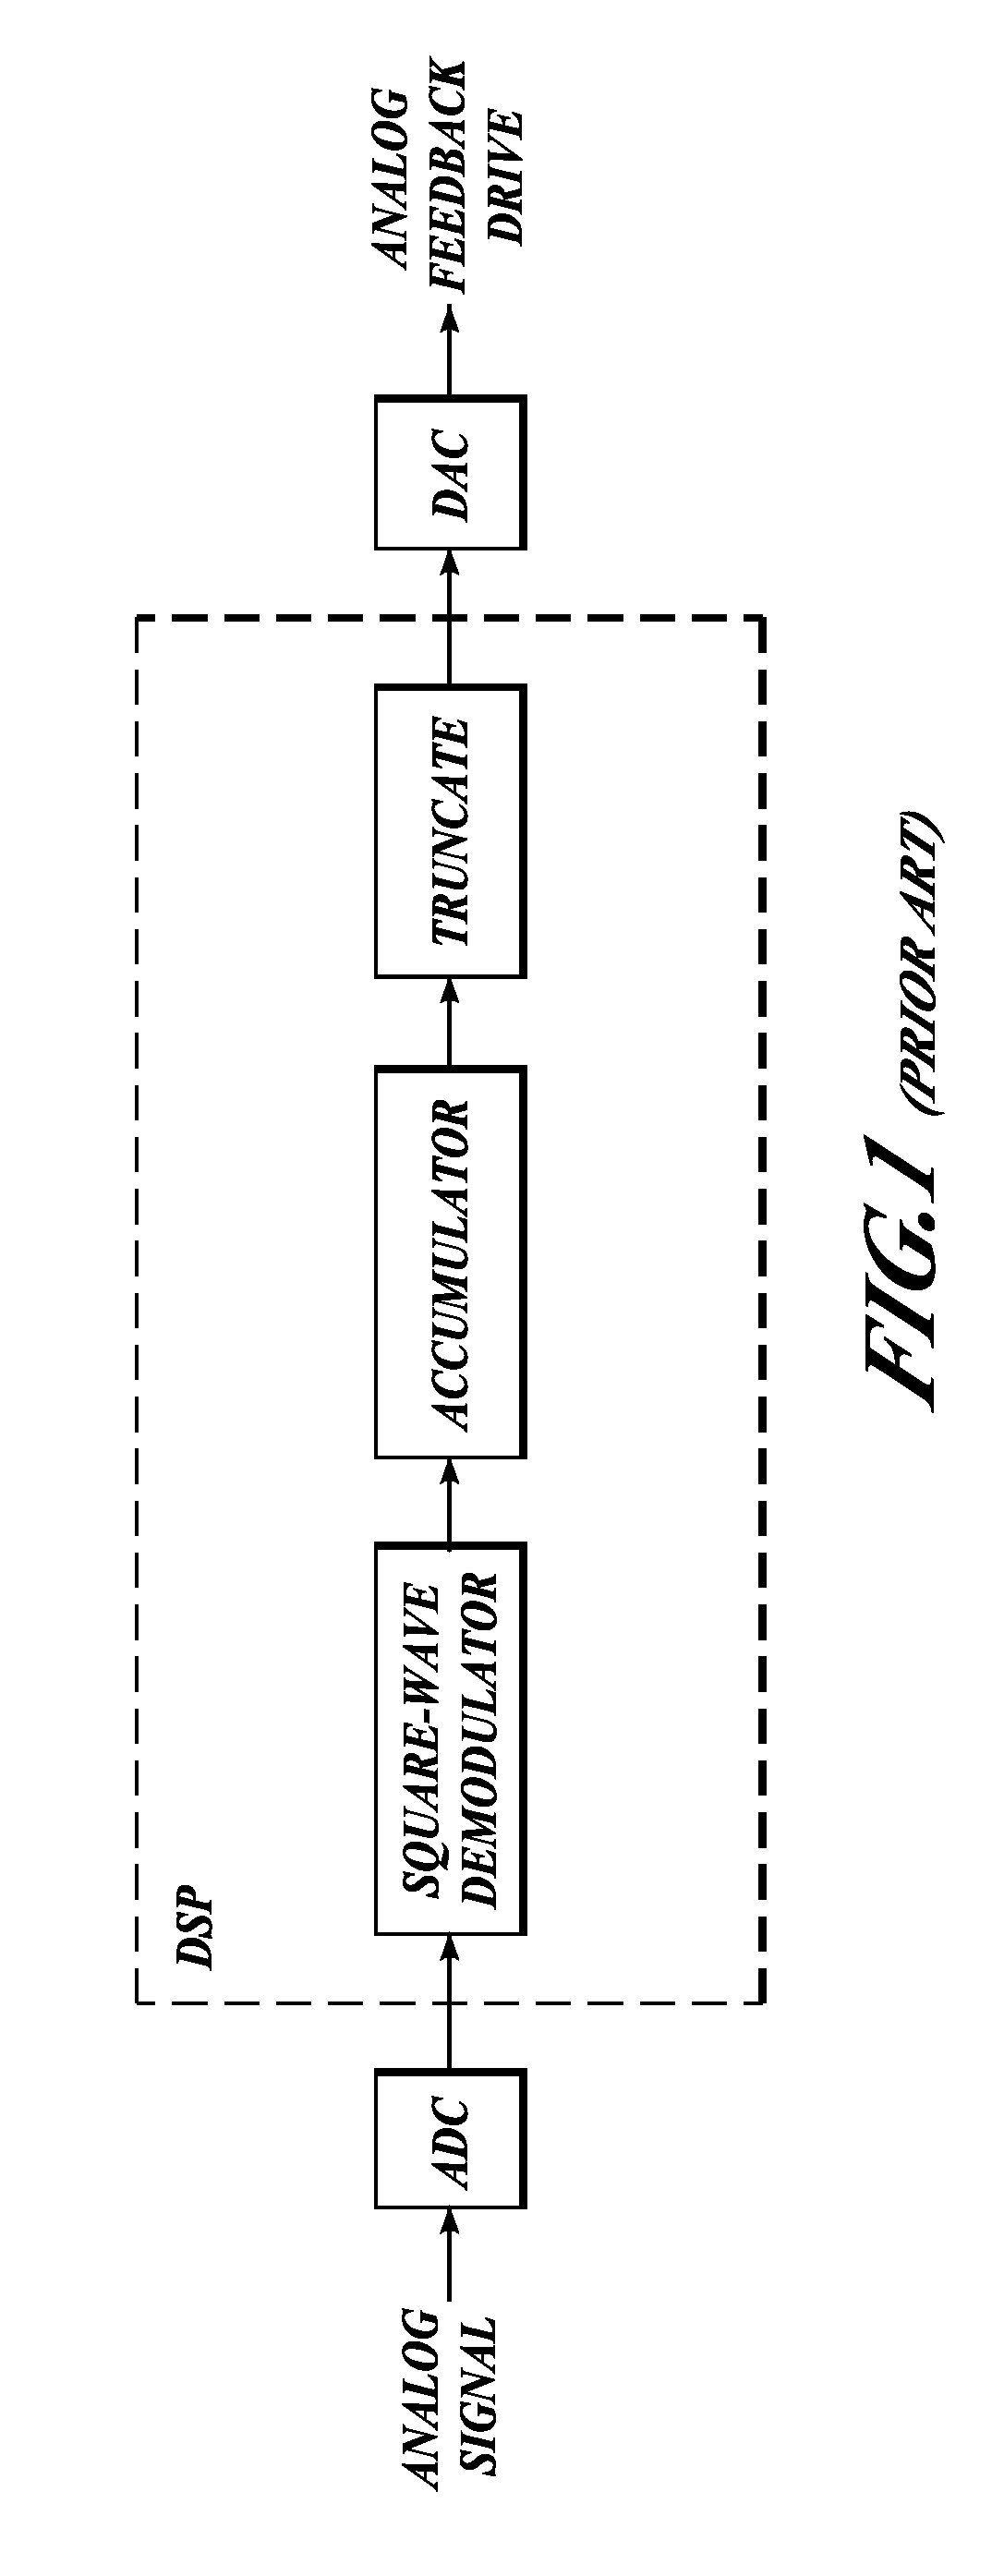 Systems and methods for improving data converters